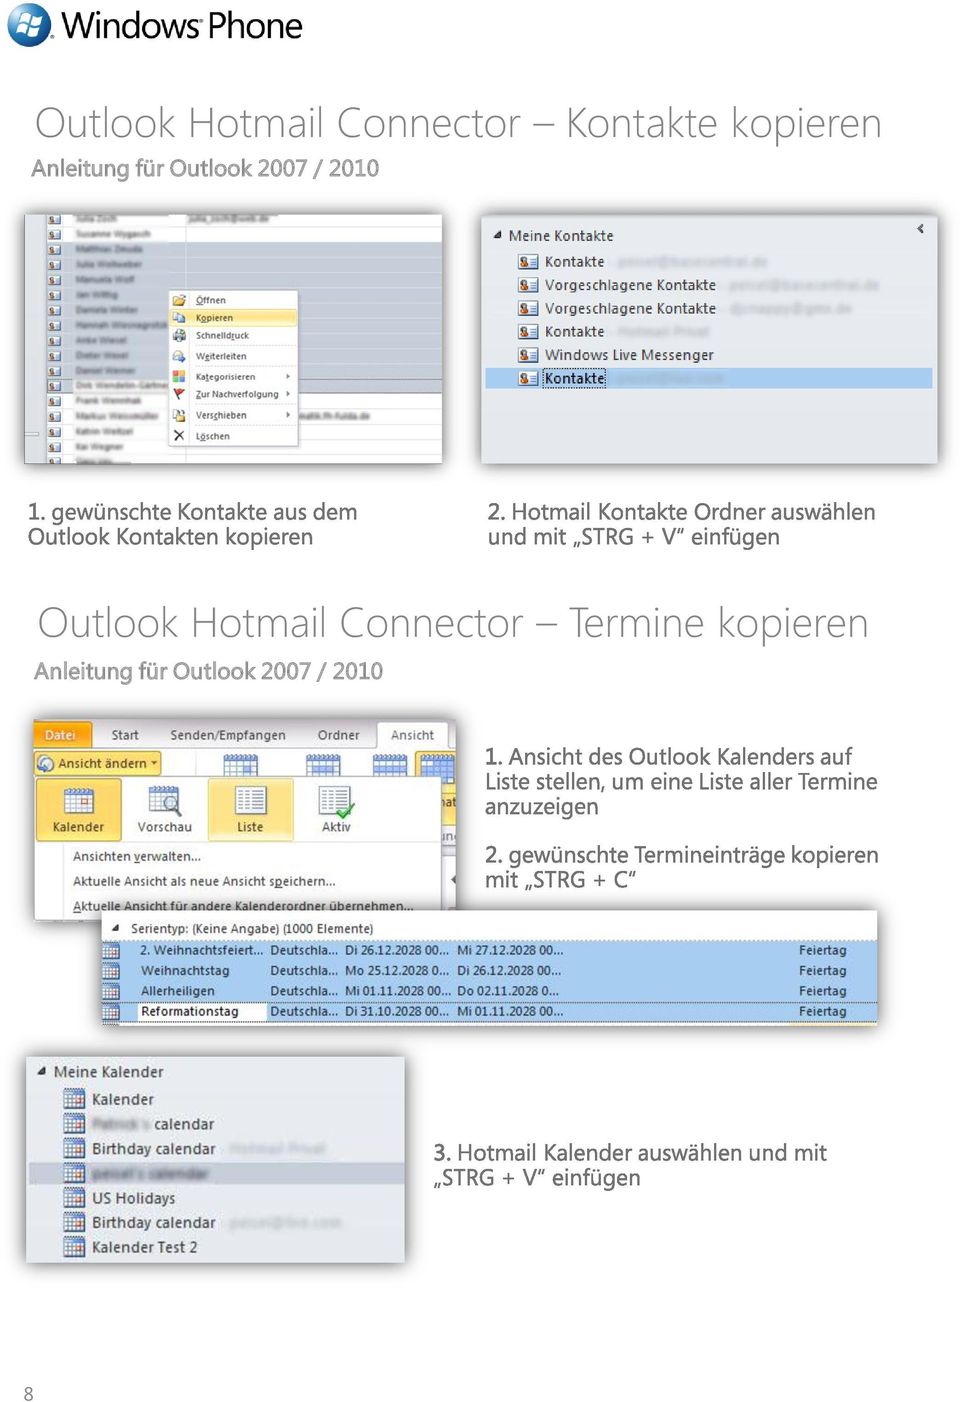 2010 Outlook Hotmail Connector Termine